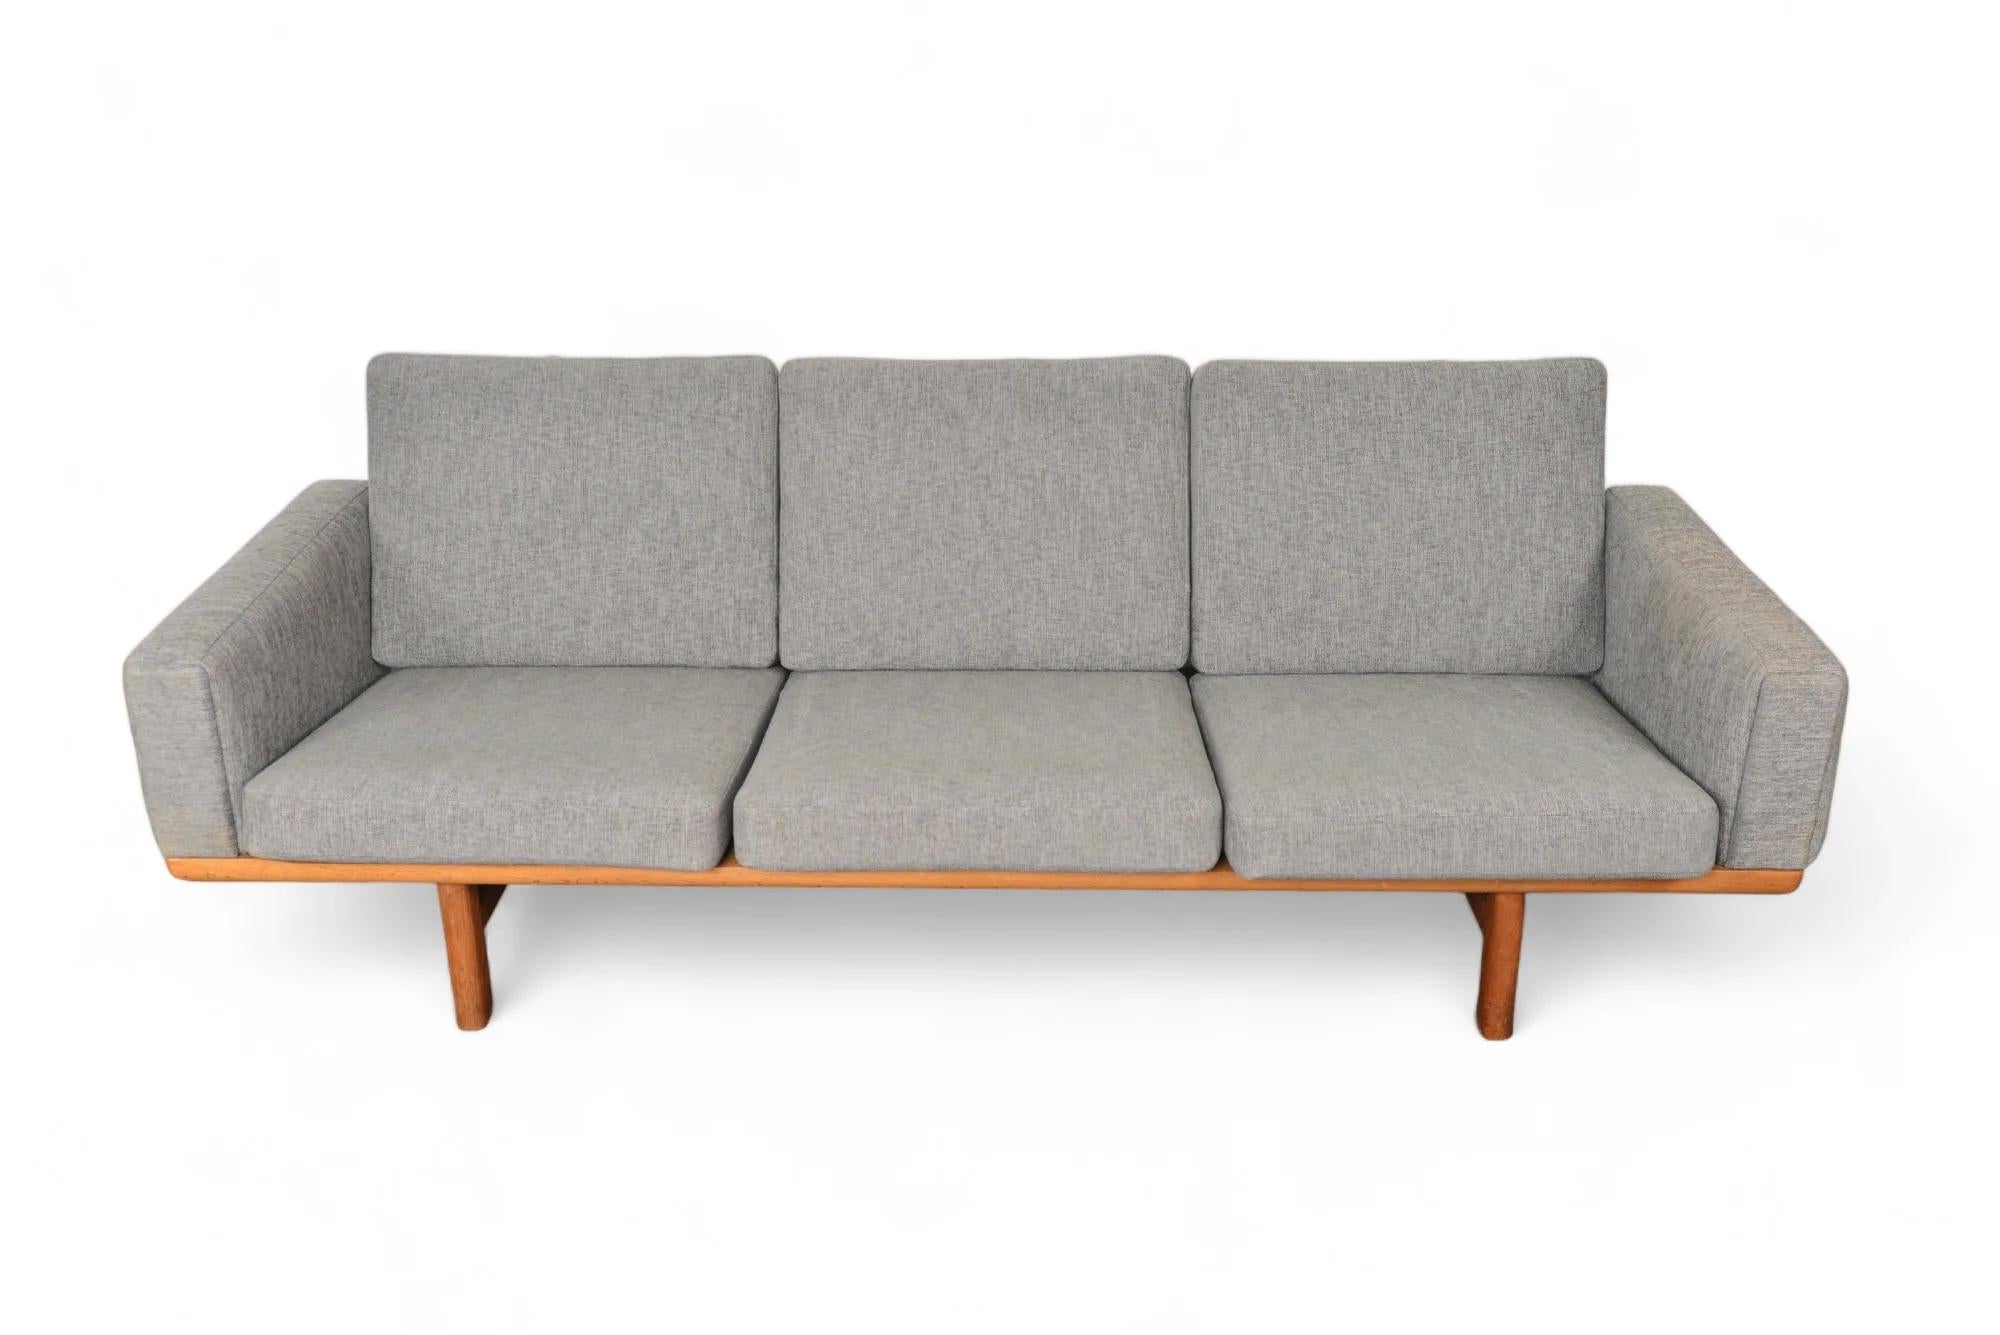 This Danish modern three seat sofa in oak was designed by Hans Wegner as model GE- 236-3 for Getama in the 1950s. This excellently preserved piece showcases a sculptural back while providing upholstered arms and six original sprung cushions.